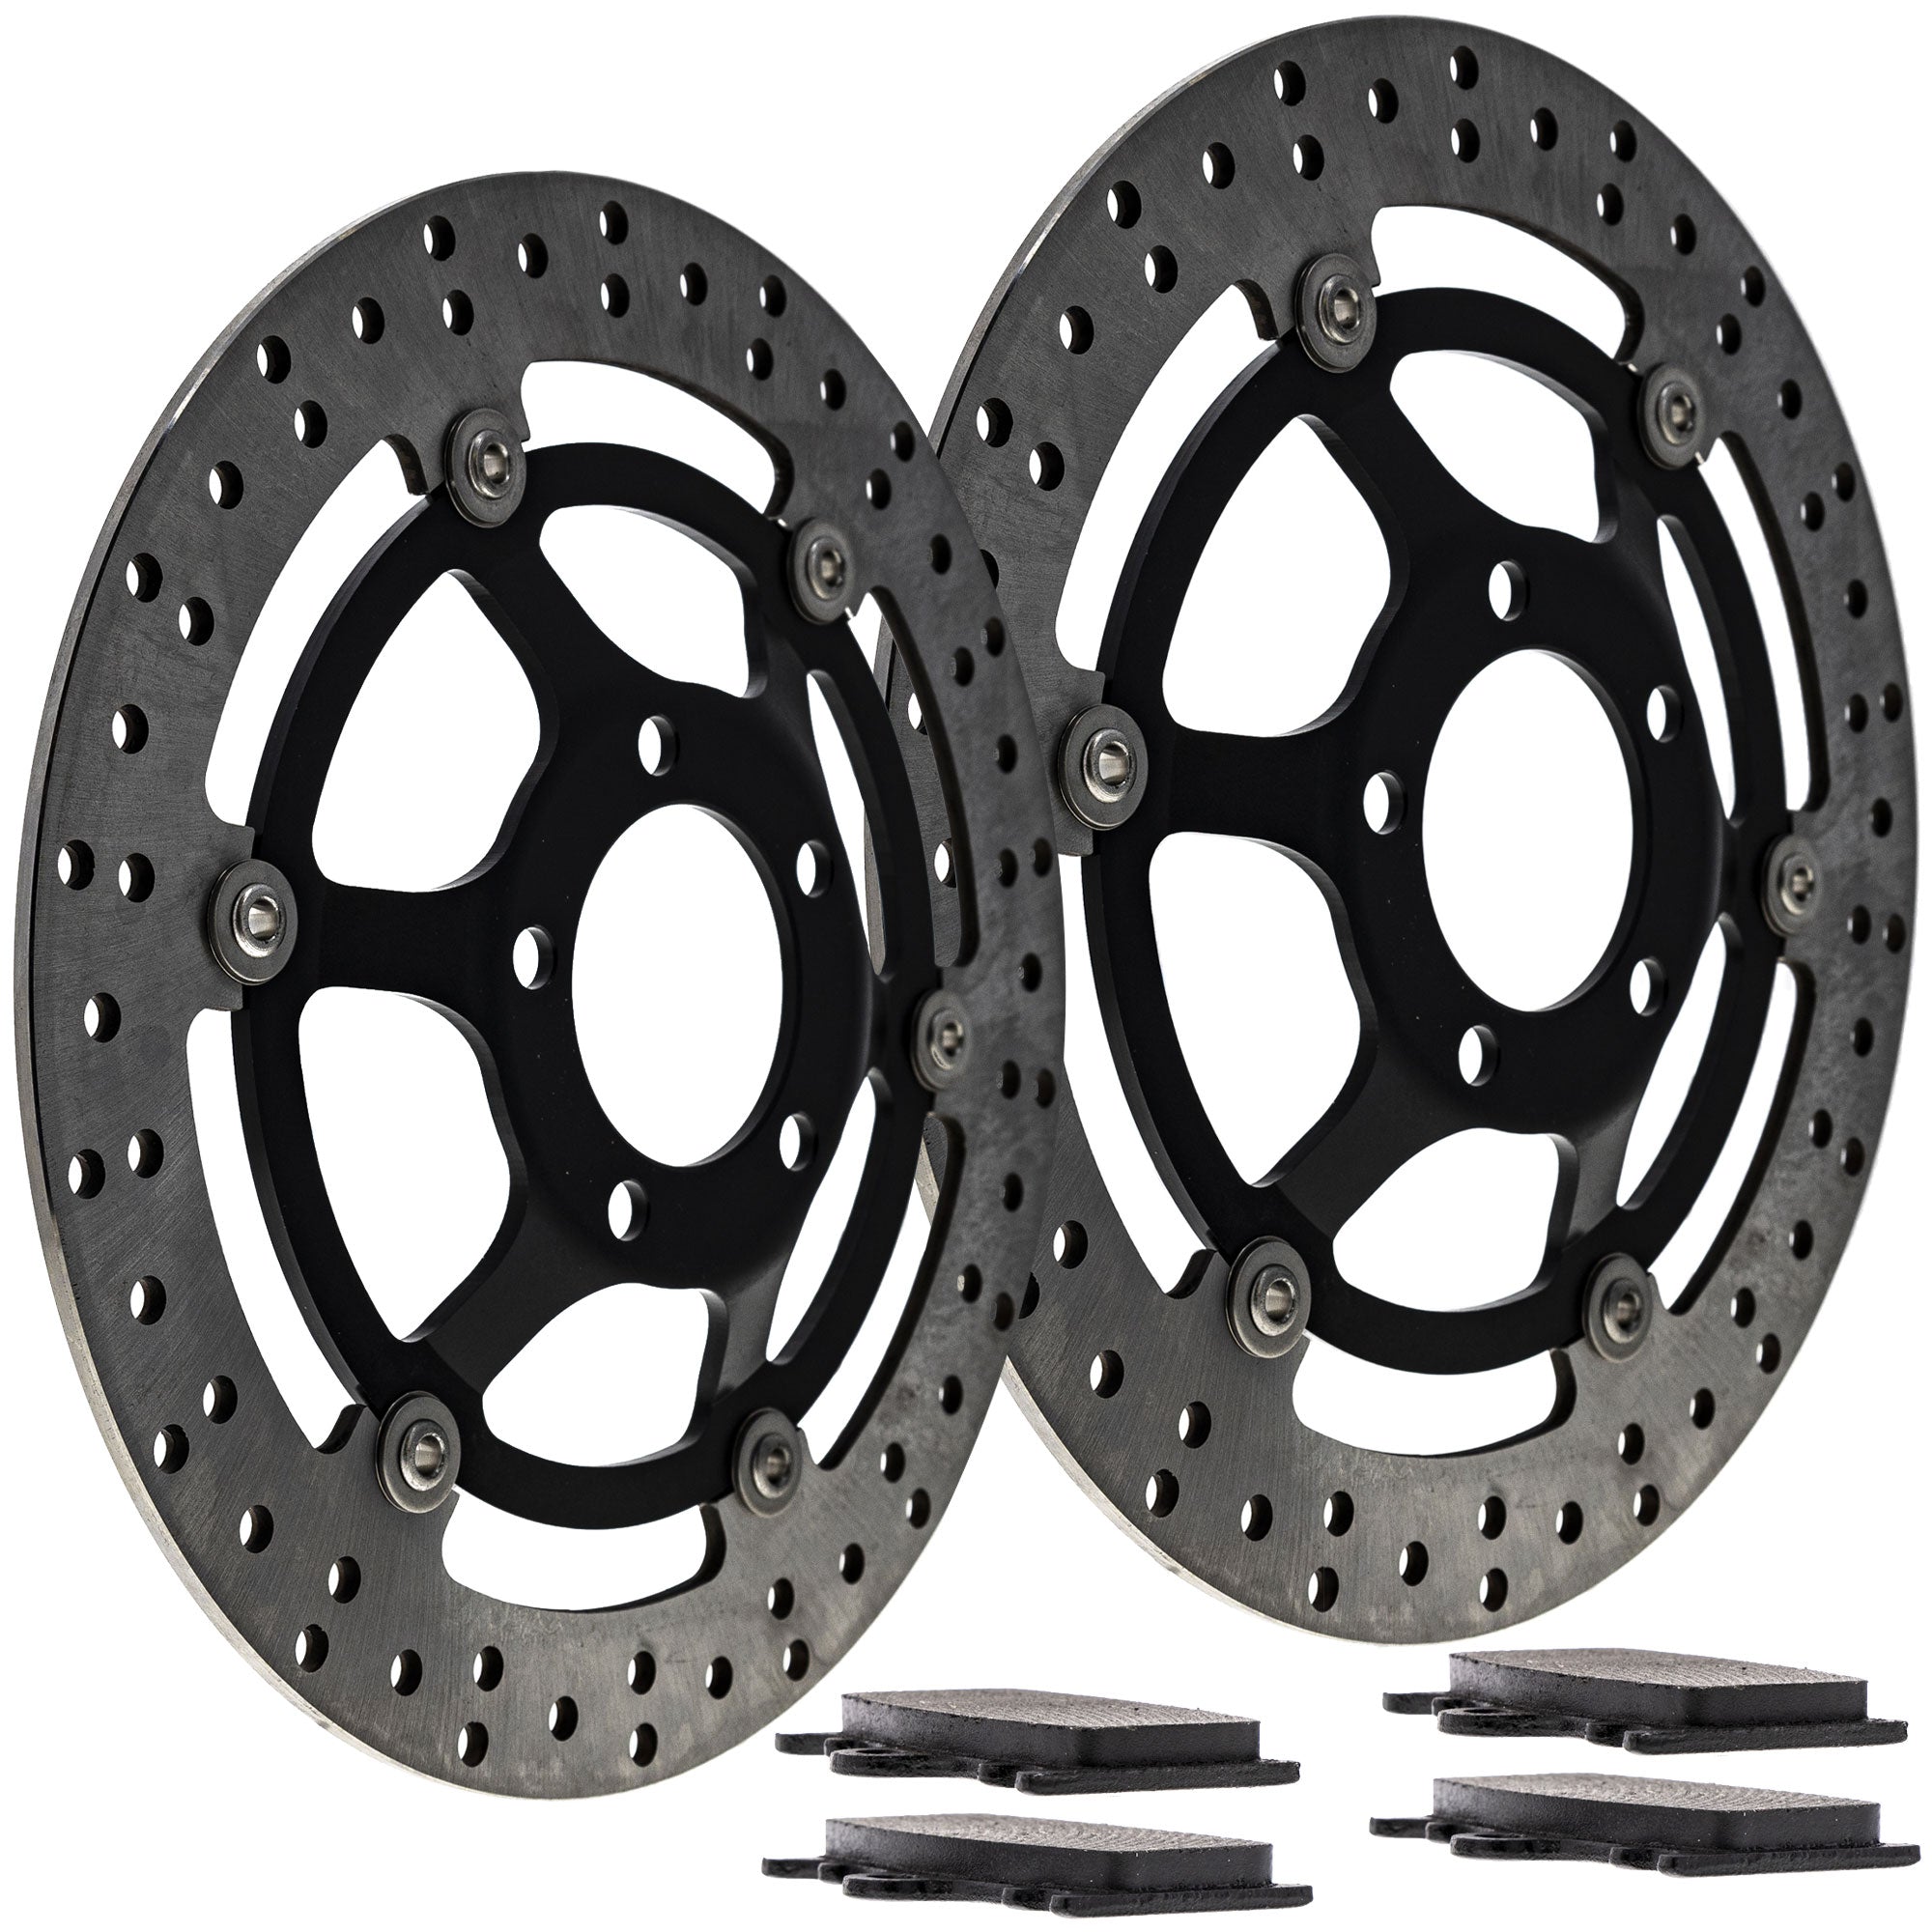 Complete Front or Rear Pad and Rotor Set for zOTHER Kawasaki RGV250 Bandit 43082-0016 NICHE MK1006727